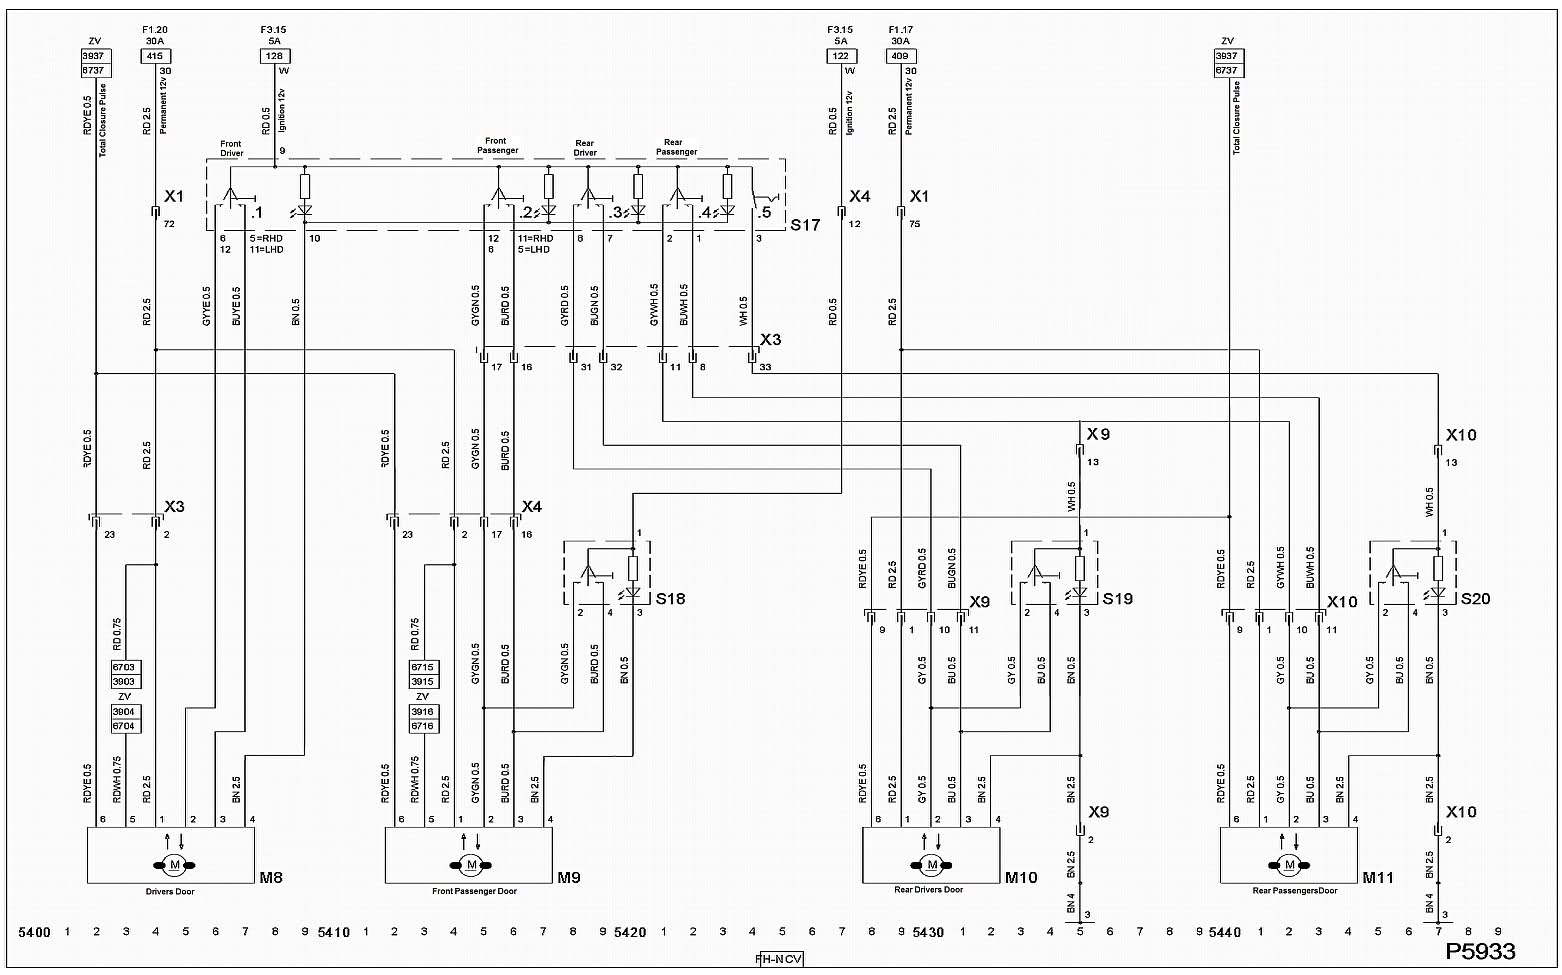 Typical electrical circuit diagram | Pearltrees